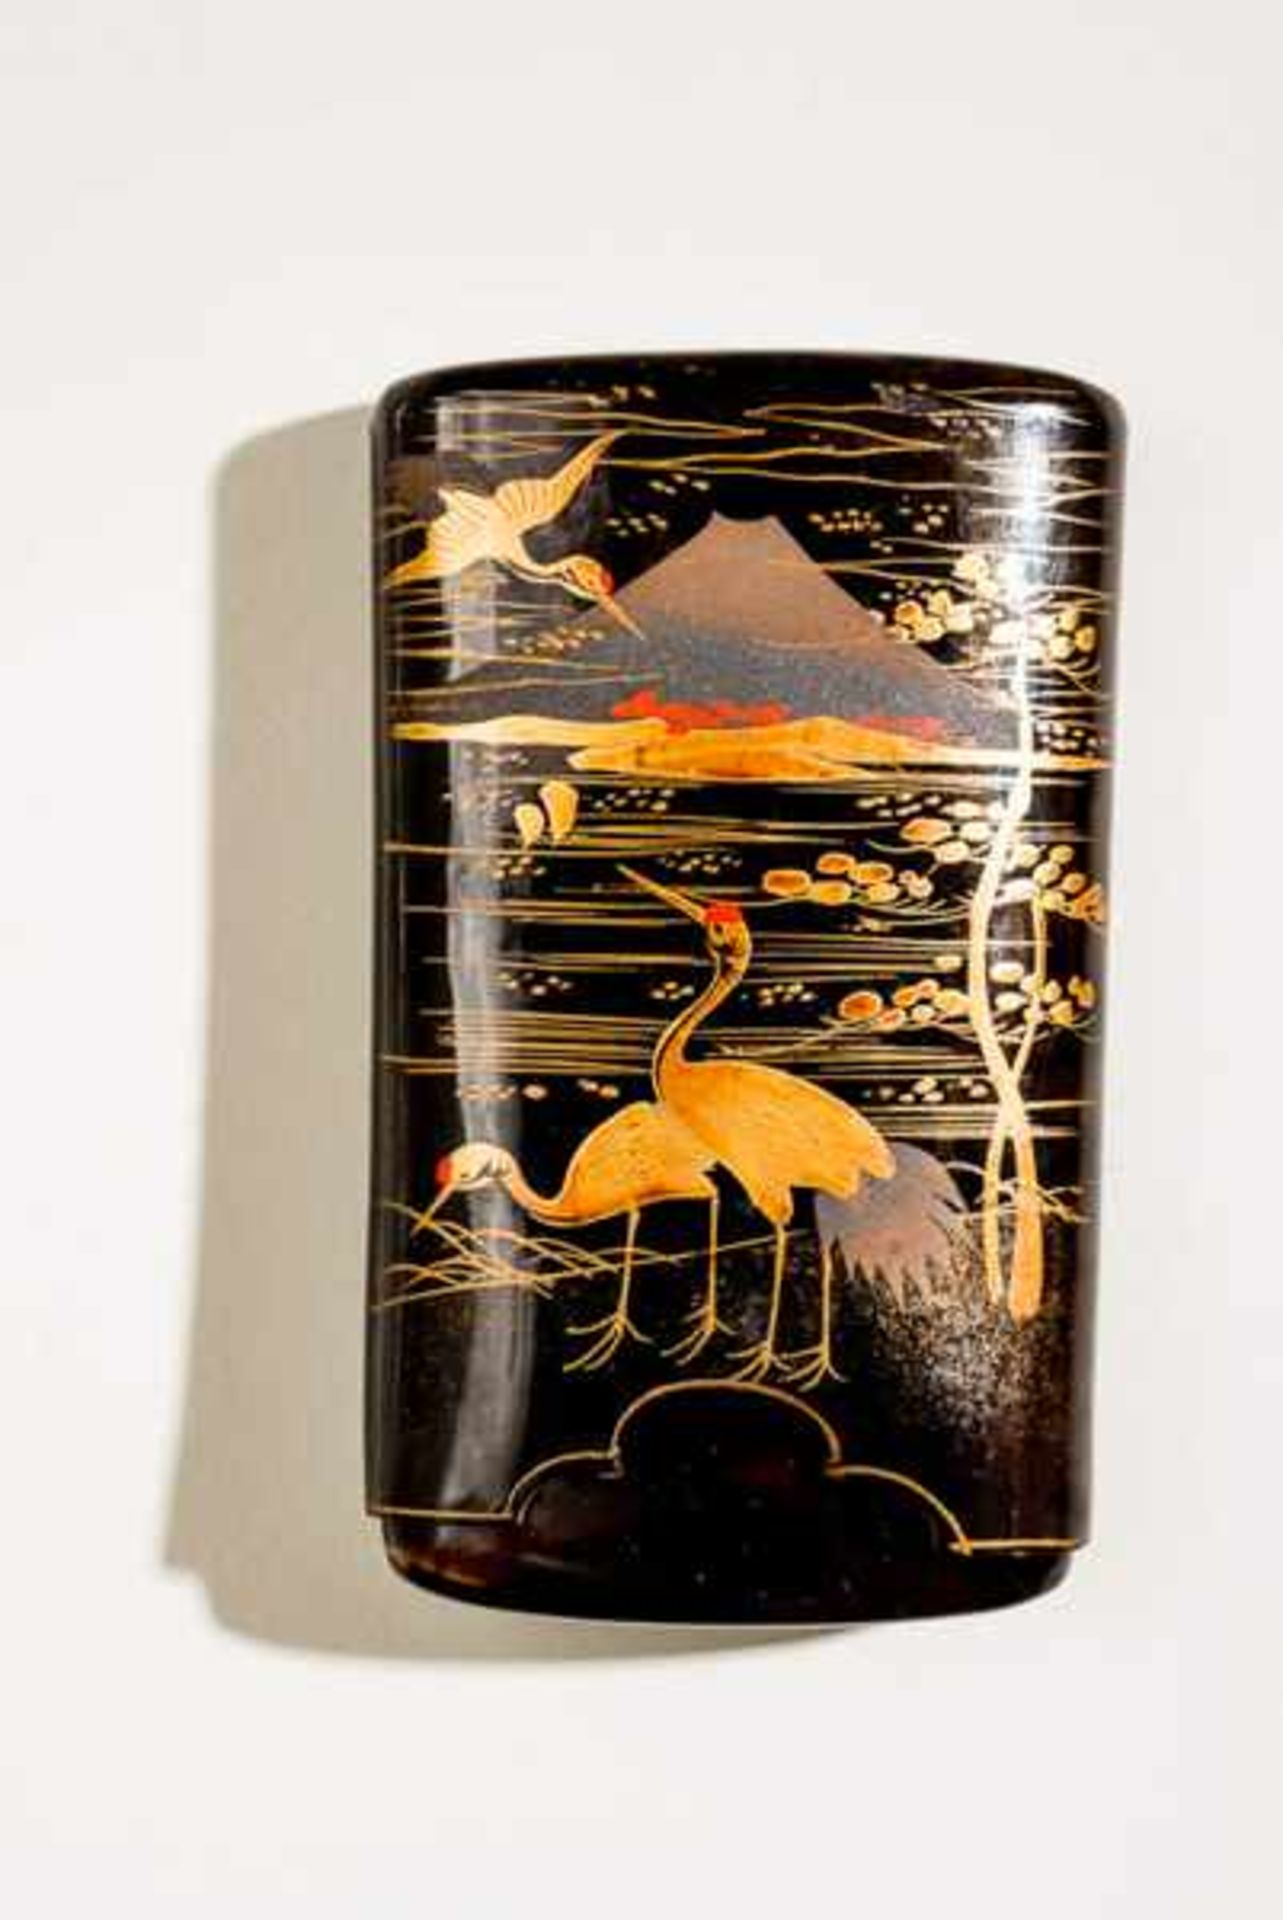 CASE WITH FUJISAN AND CRANES Tortoise shell and lacquer with gold. Japan, 19th cent.Elegantly